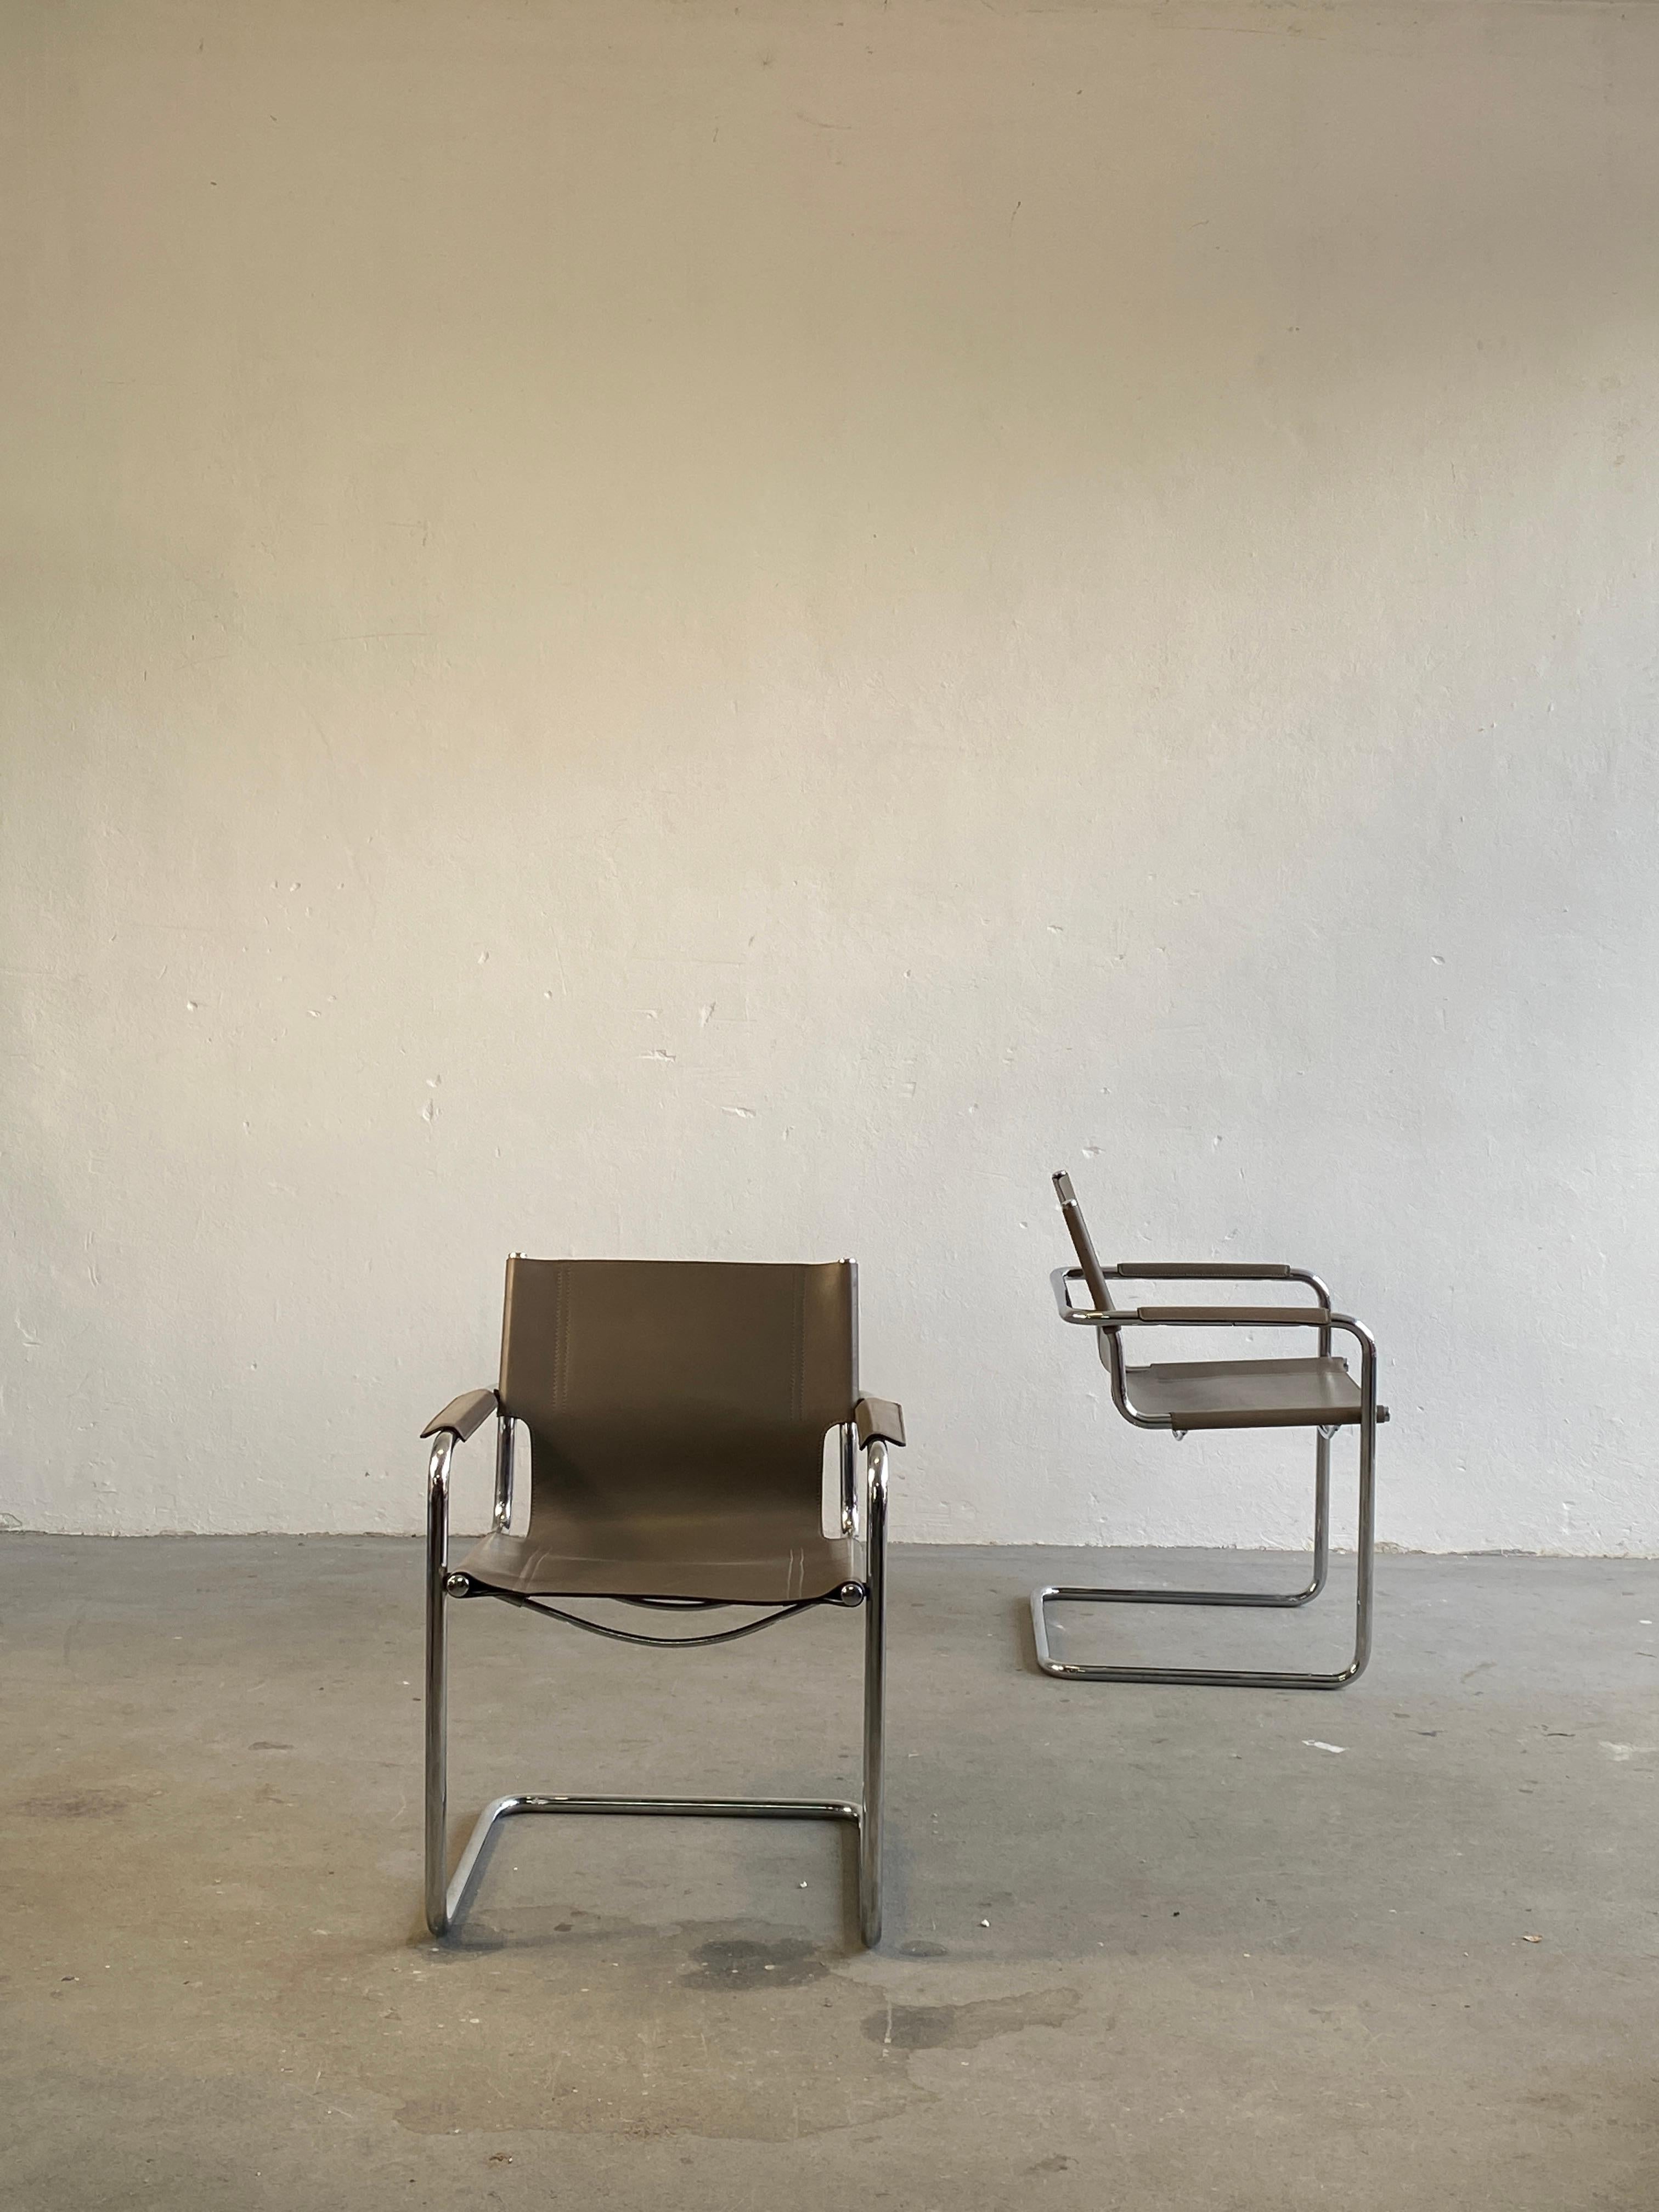 Vintage Leather Cantilever Chairs, Centro Studi for Matteo Grassi, 1980s Italy 2